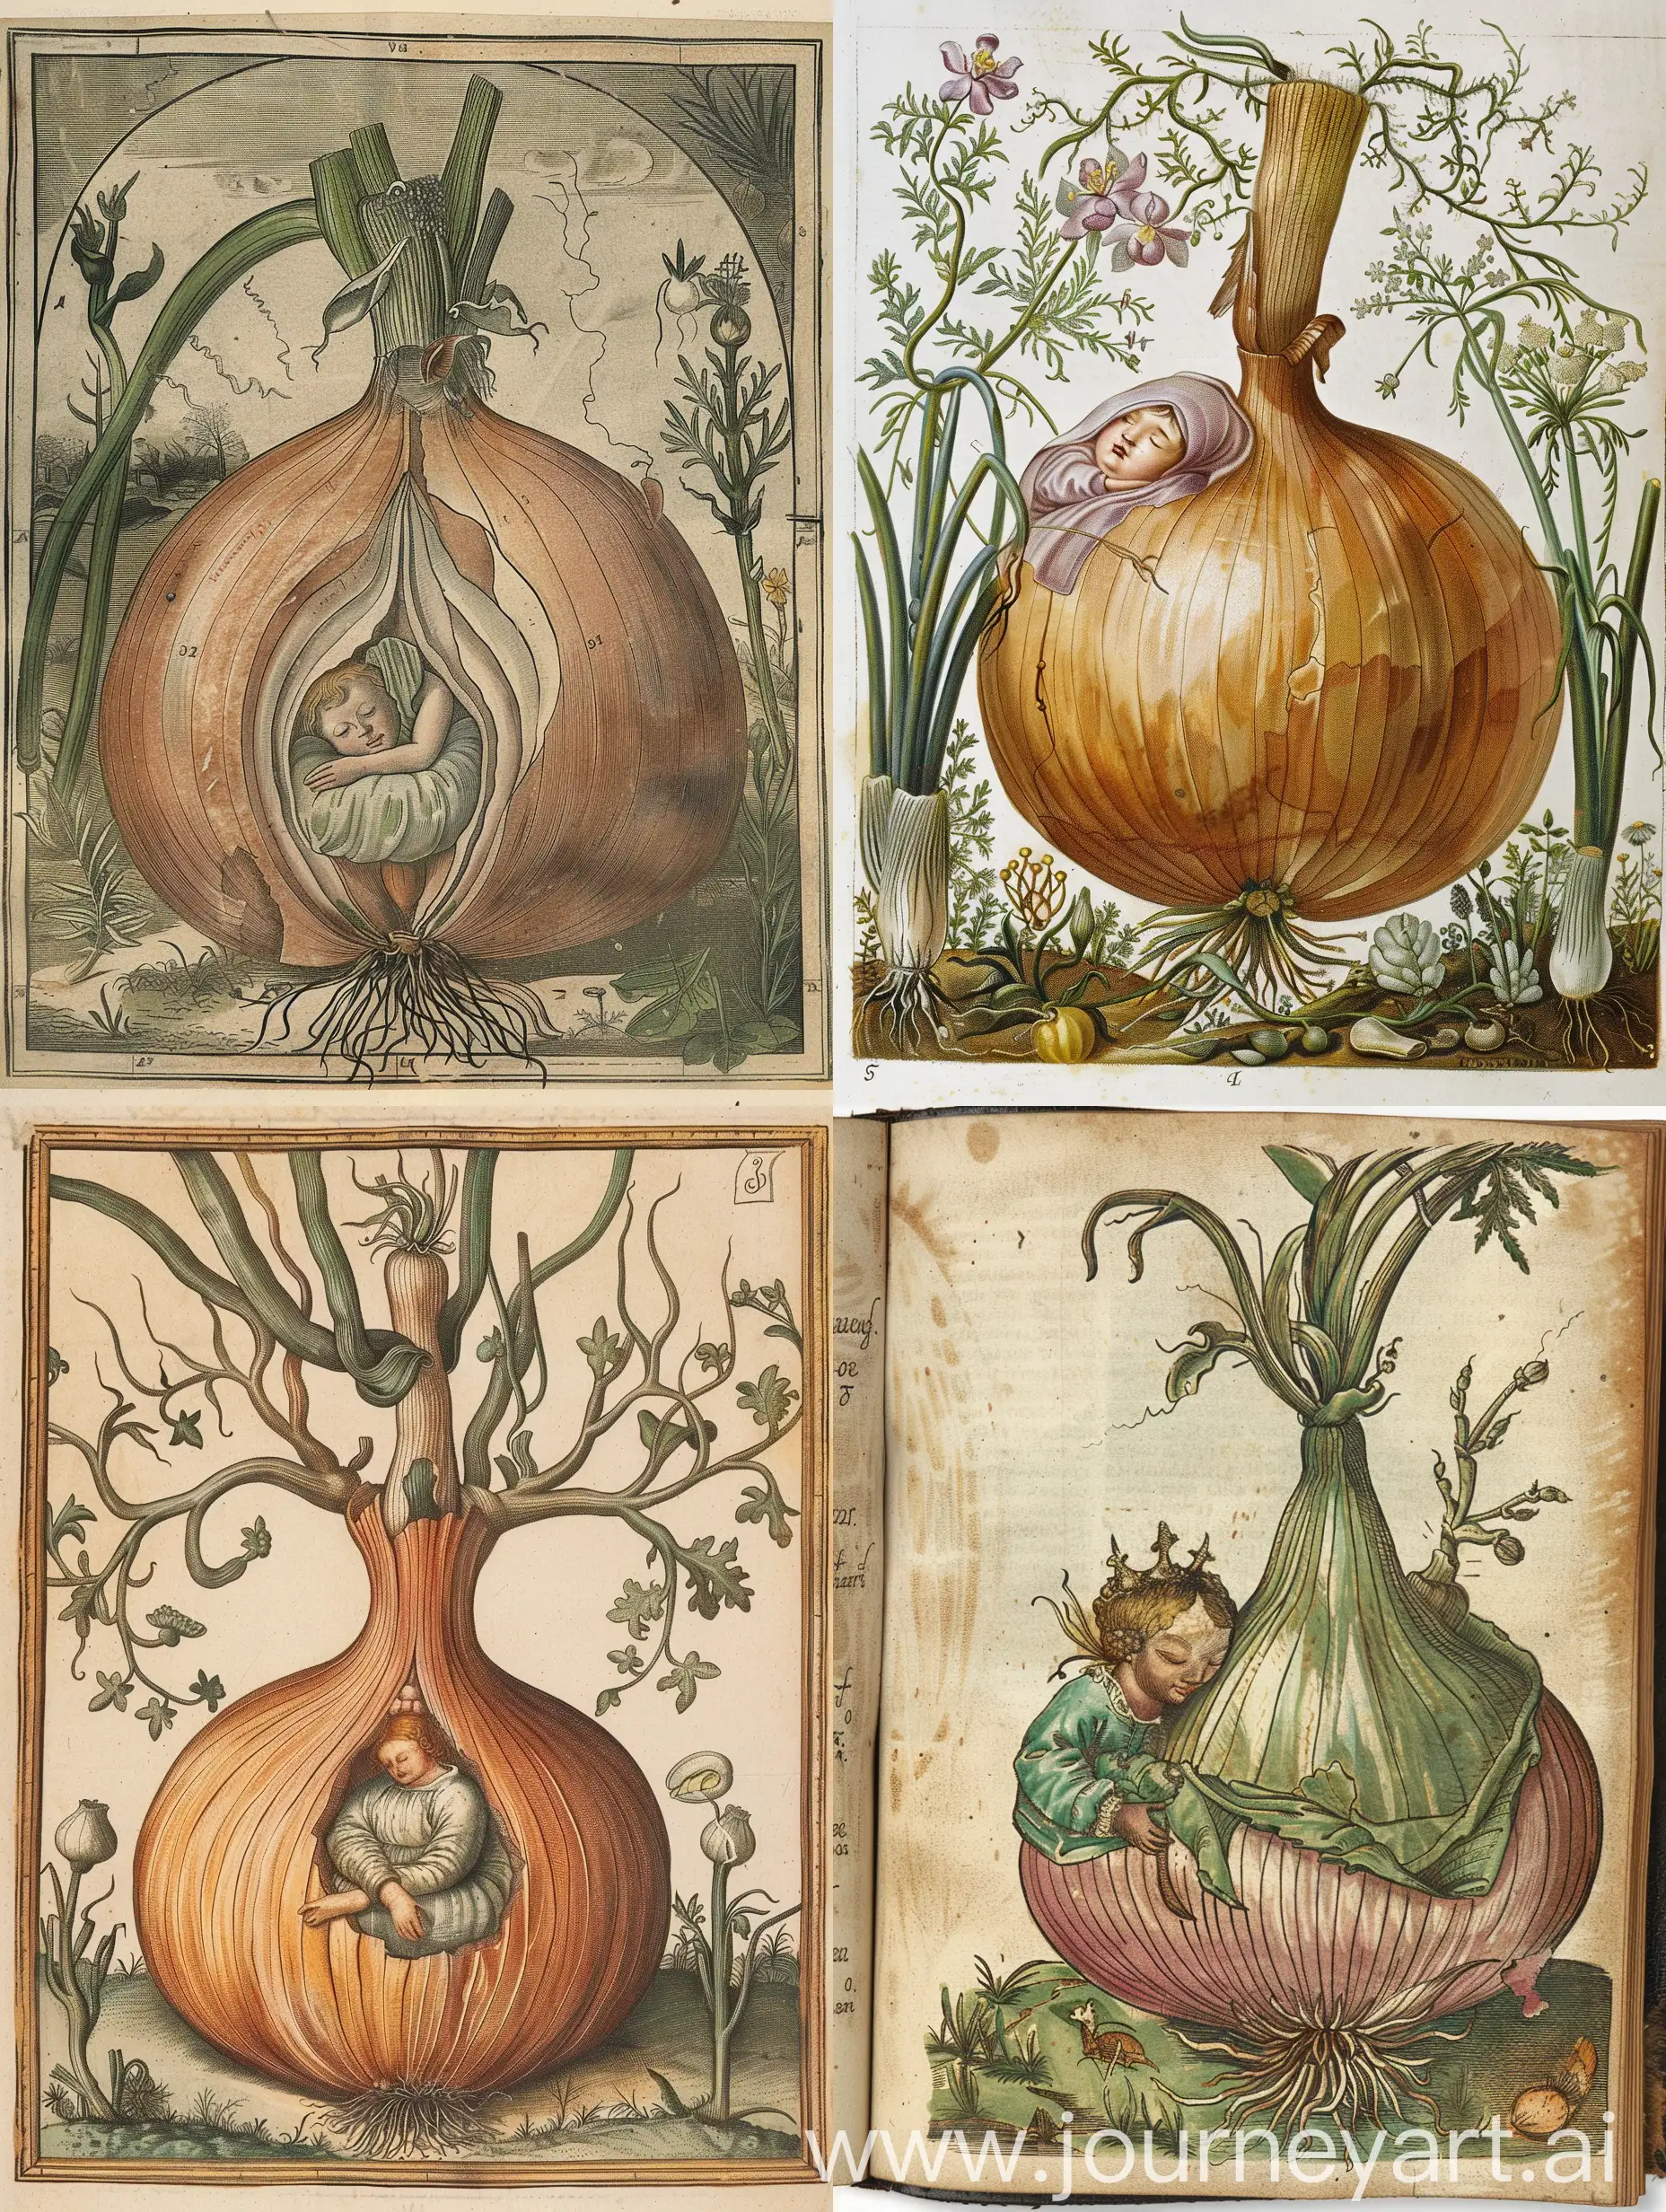 A picture in a botanical atlas: an onion in which a person sleeps. Association with spring